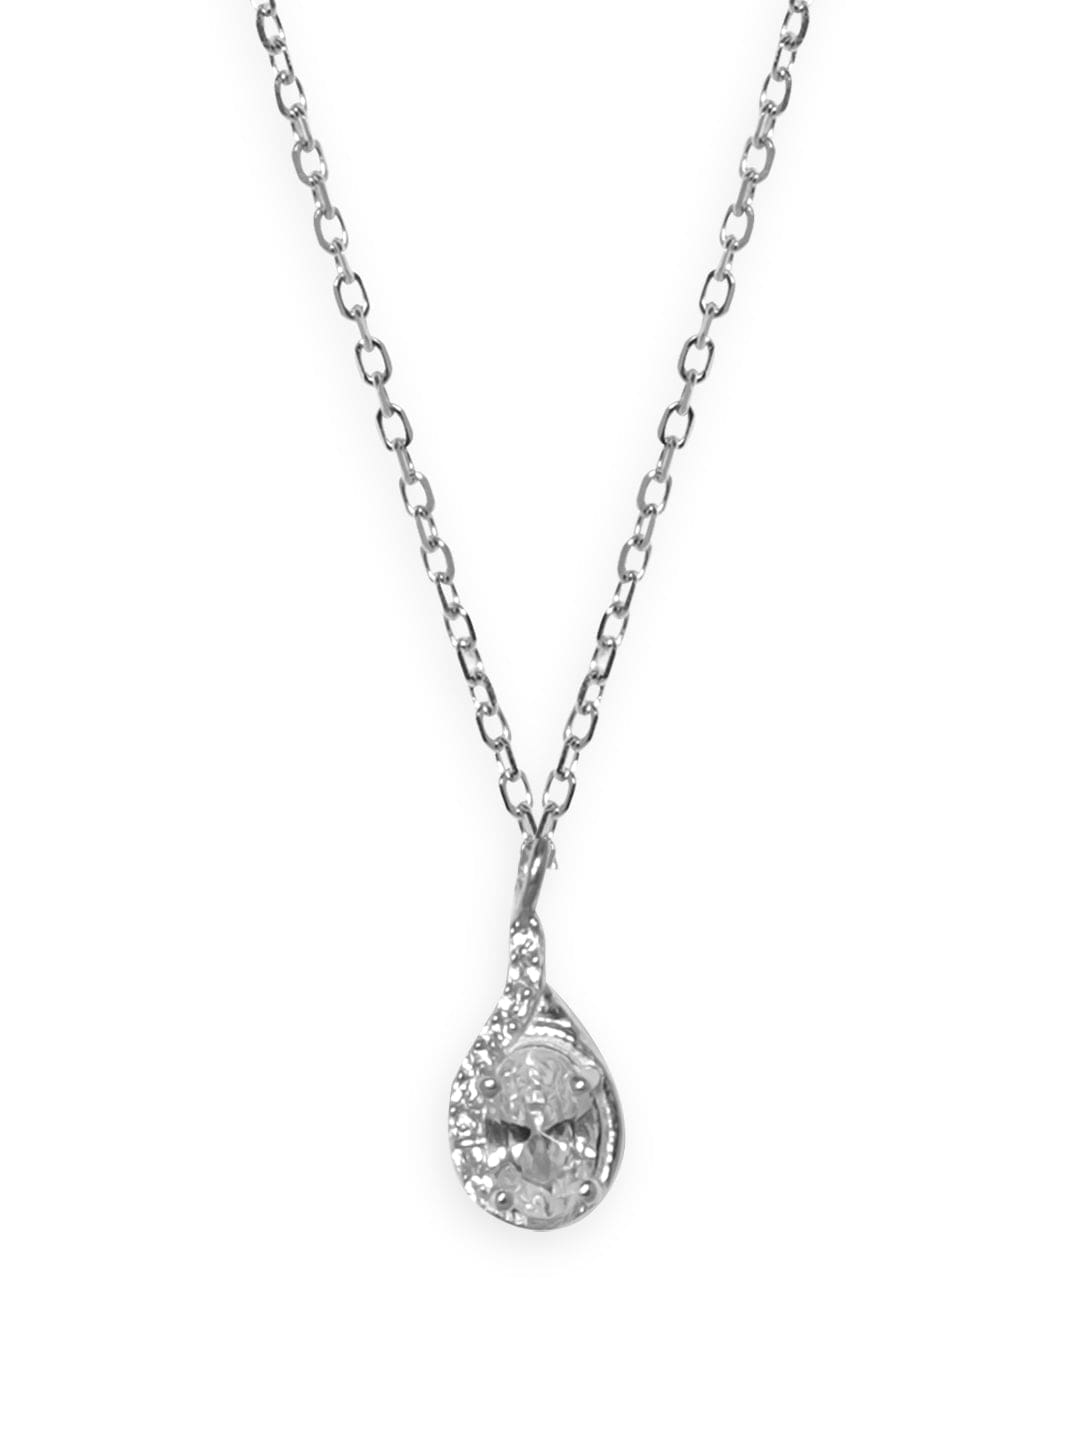 Rubans 925 Silver Rhodium plated zirconia studded pendant drop necklace. Necklaces, Necklace Sets, Chains &amp; Mangalsutra